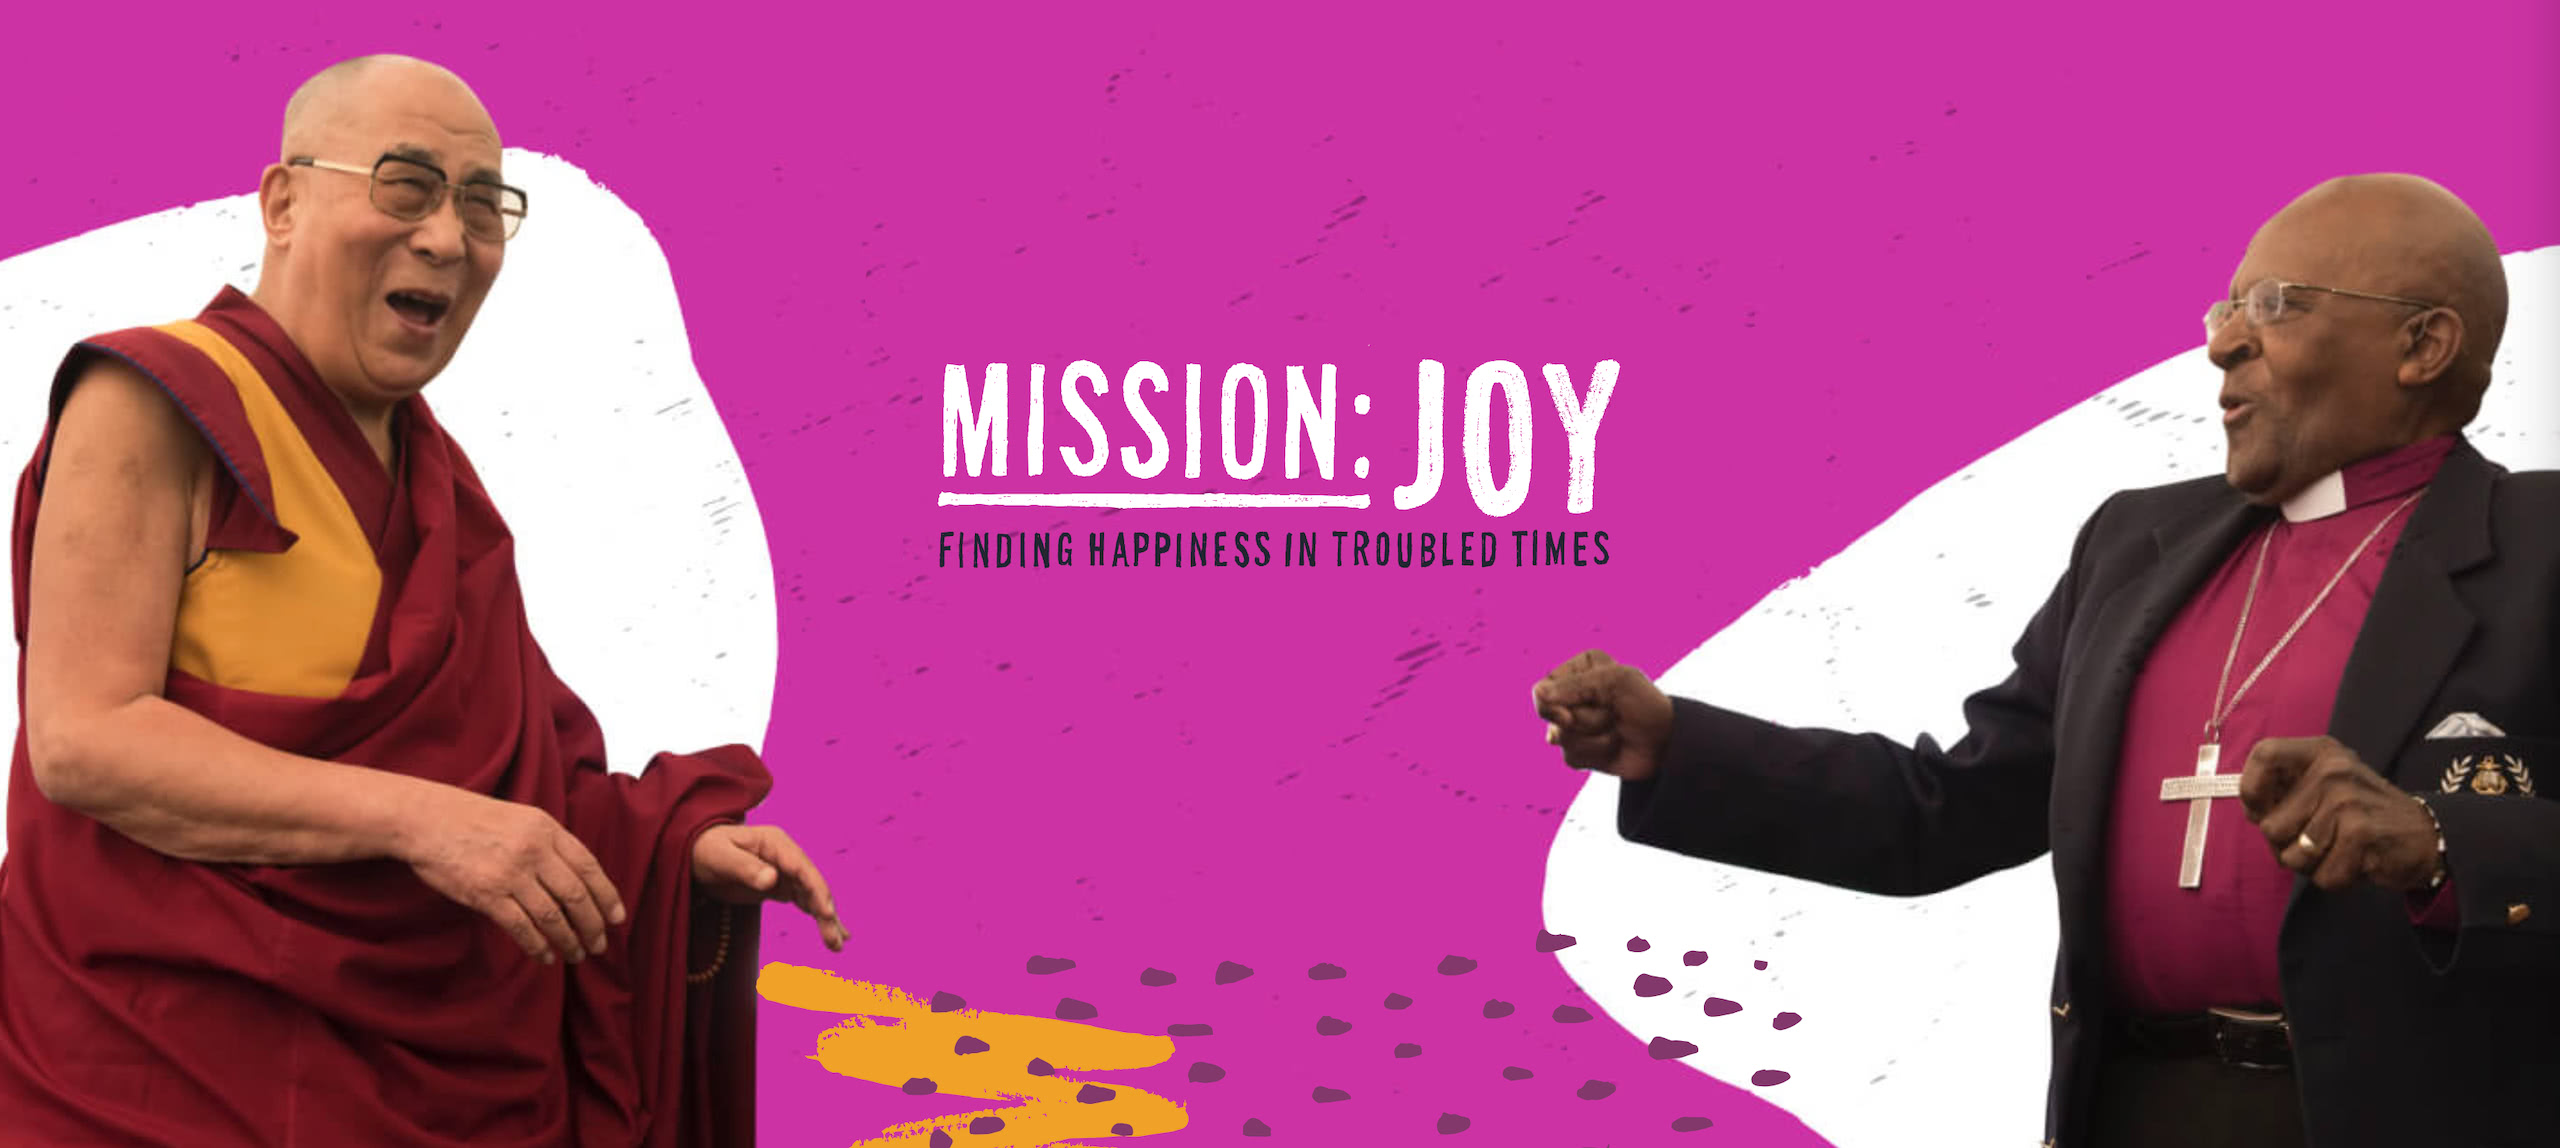 Mission: JOY — Finding Happiness in Troubled Times
Photo of His Holiness the Dalai Lama and Archbishop Desmond Tutu